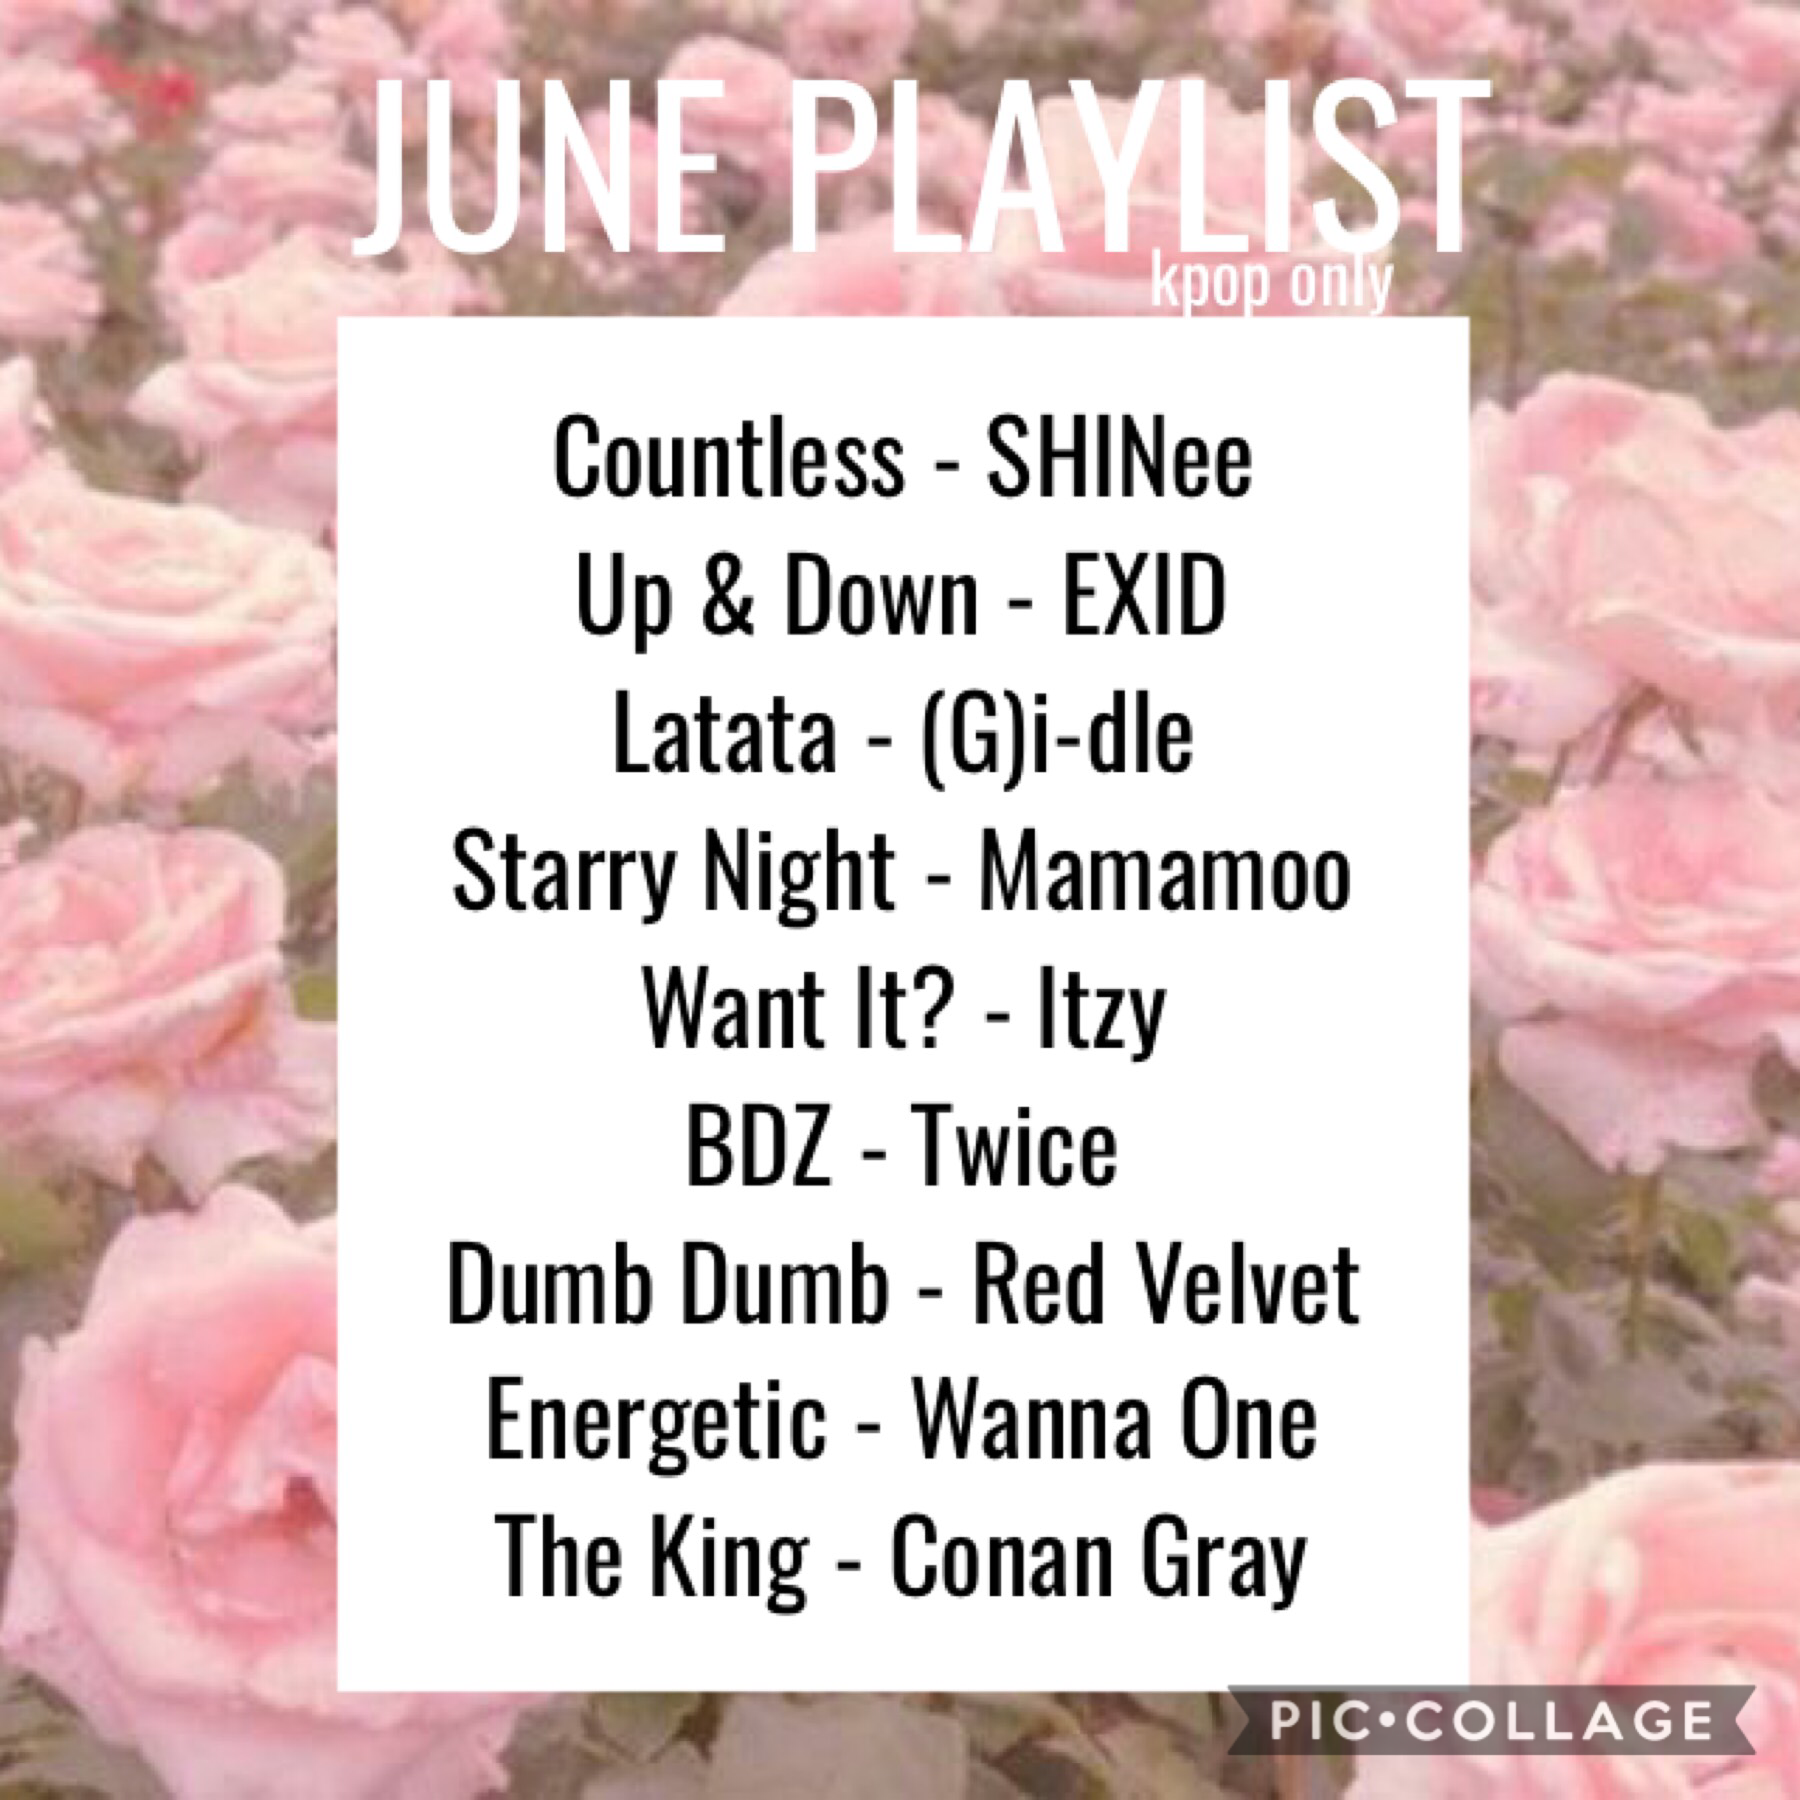 I’ve never posted a playlist, but I decided to post one 🤗